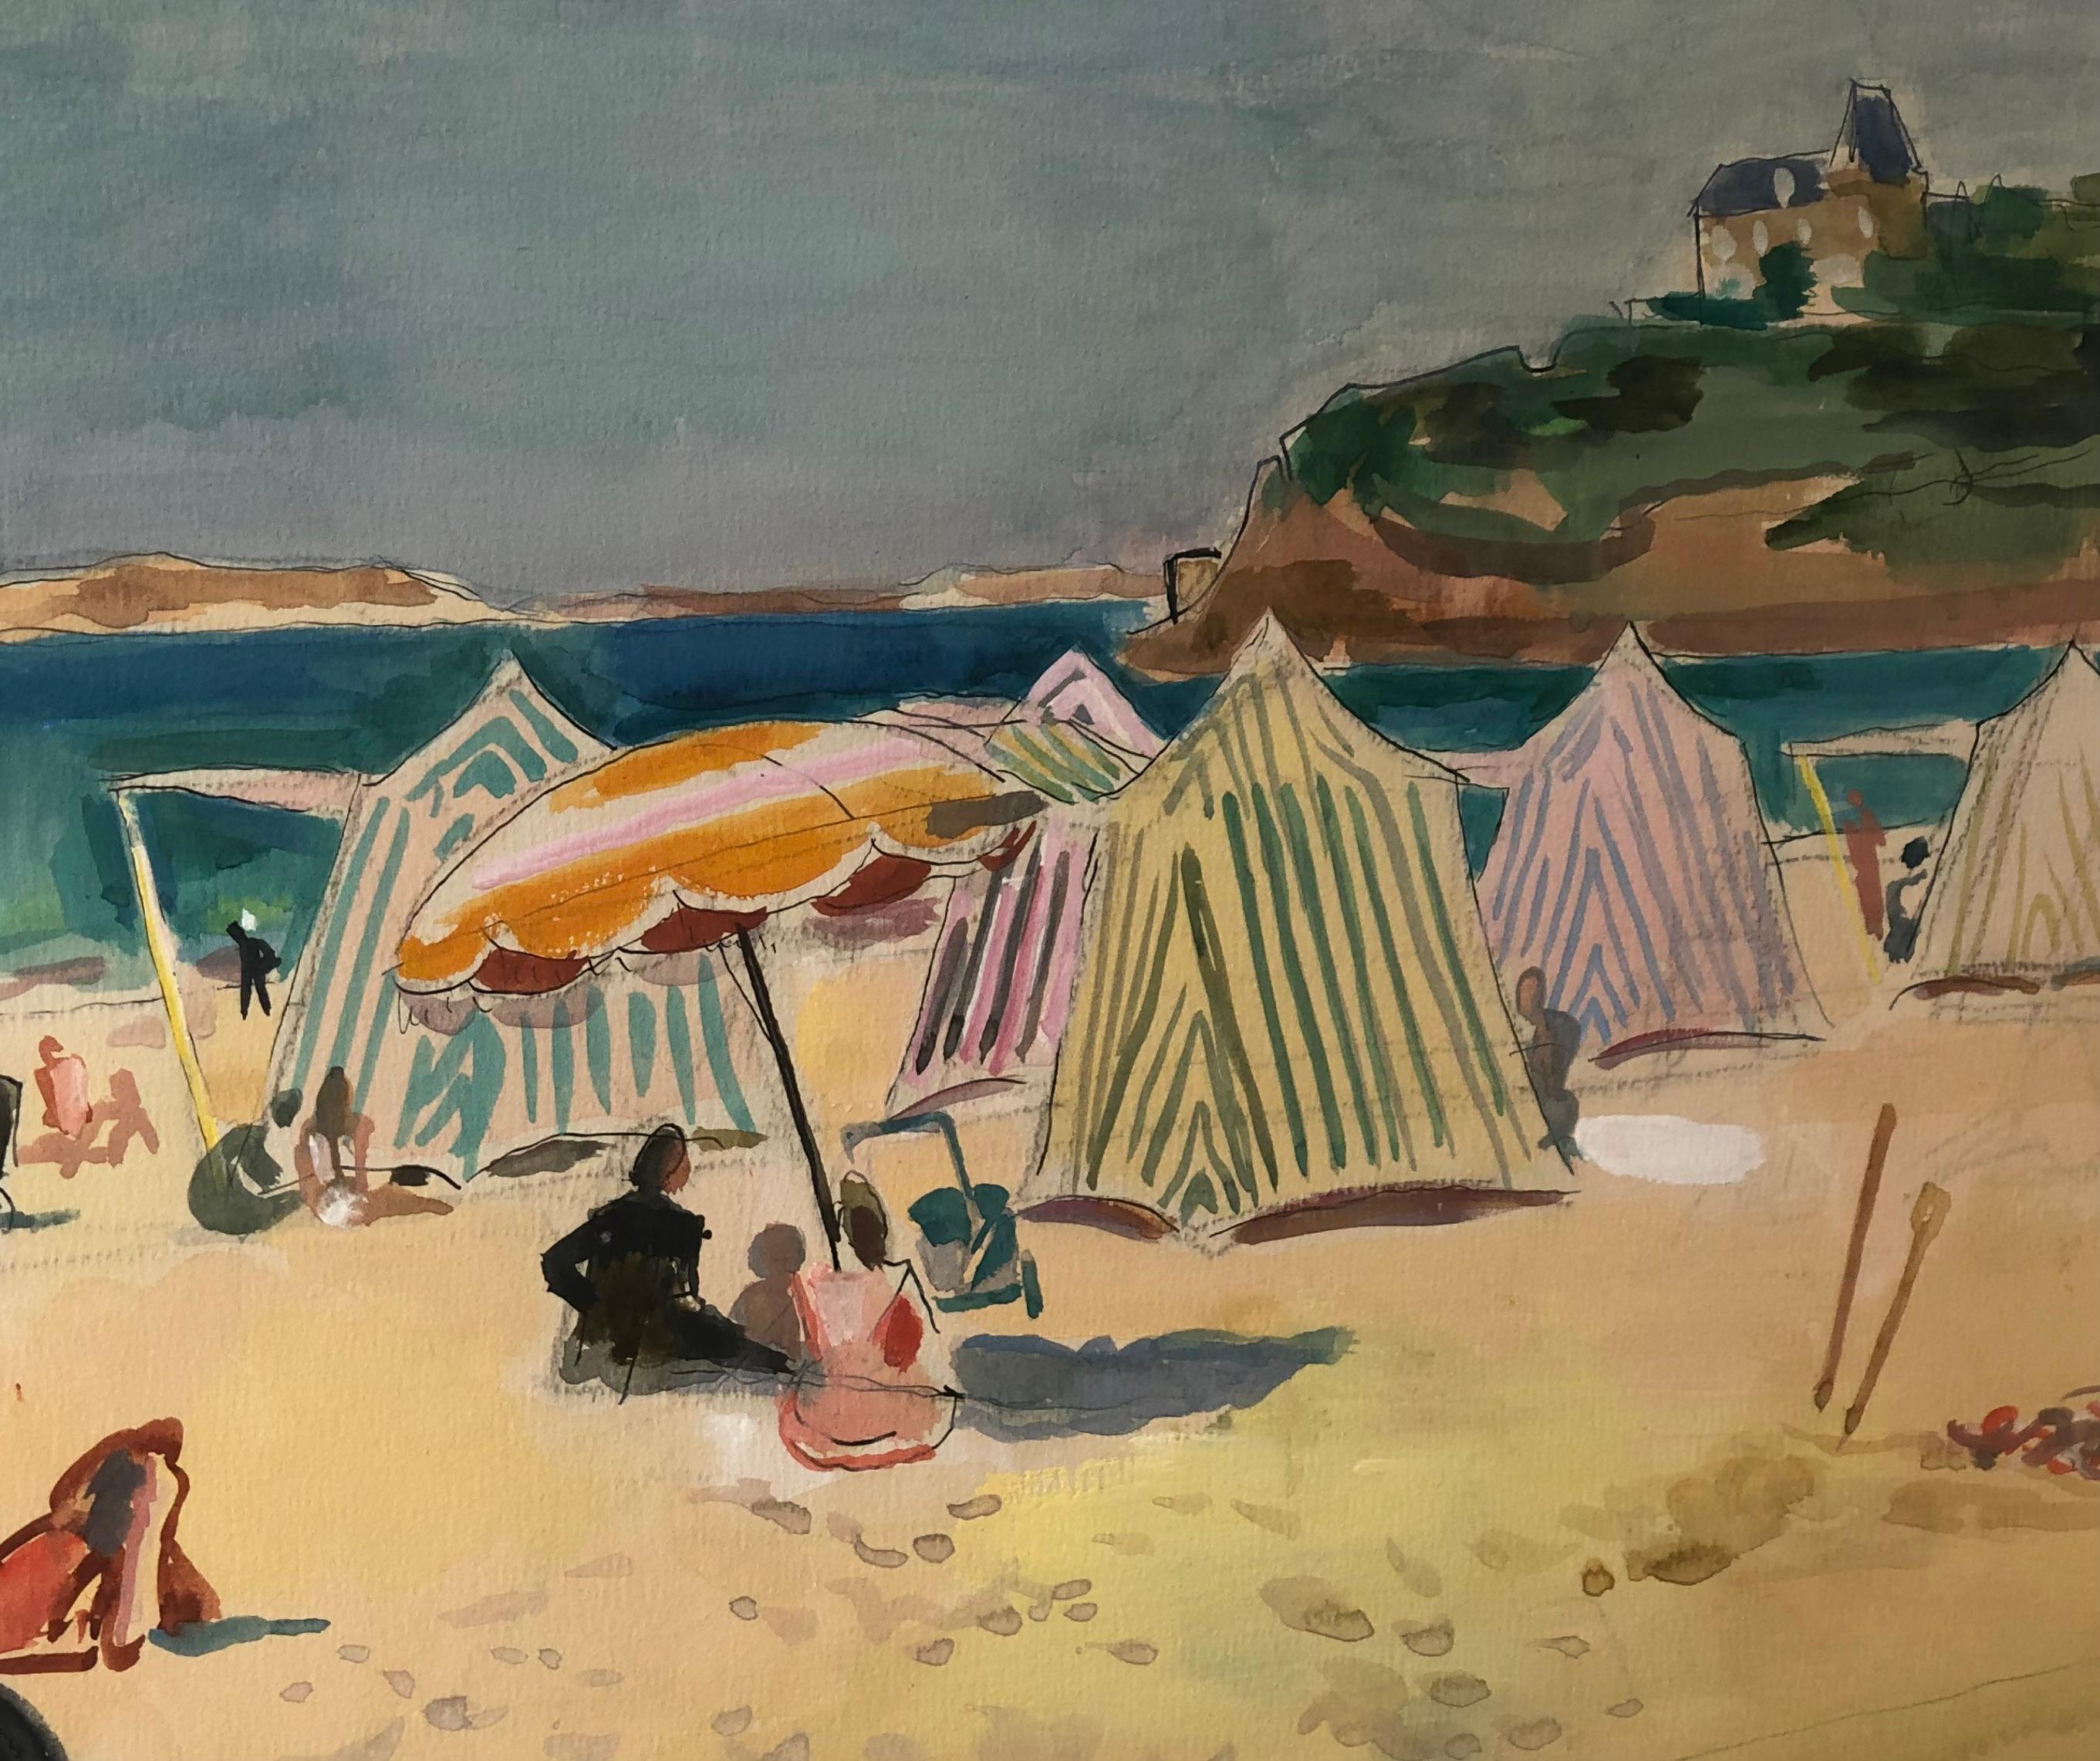 André Planson

​

La Plage, 1946

​

gouache, signed and dated lower right, 46 x 60cm

​

 

Provenance: Private Collection, Paris

​

Marie Dominique Planson, the daughter of the artist, has confirmed the authenticity of the piece.